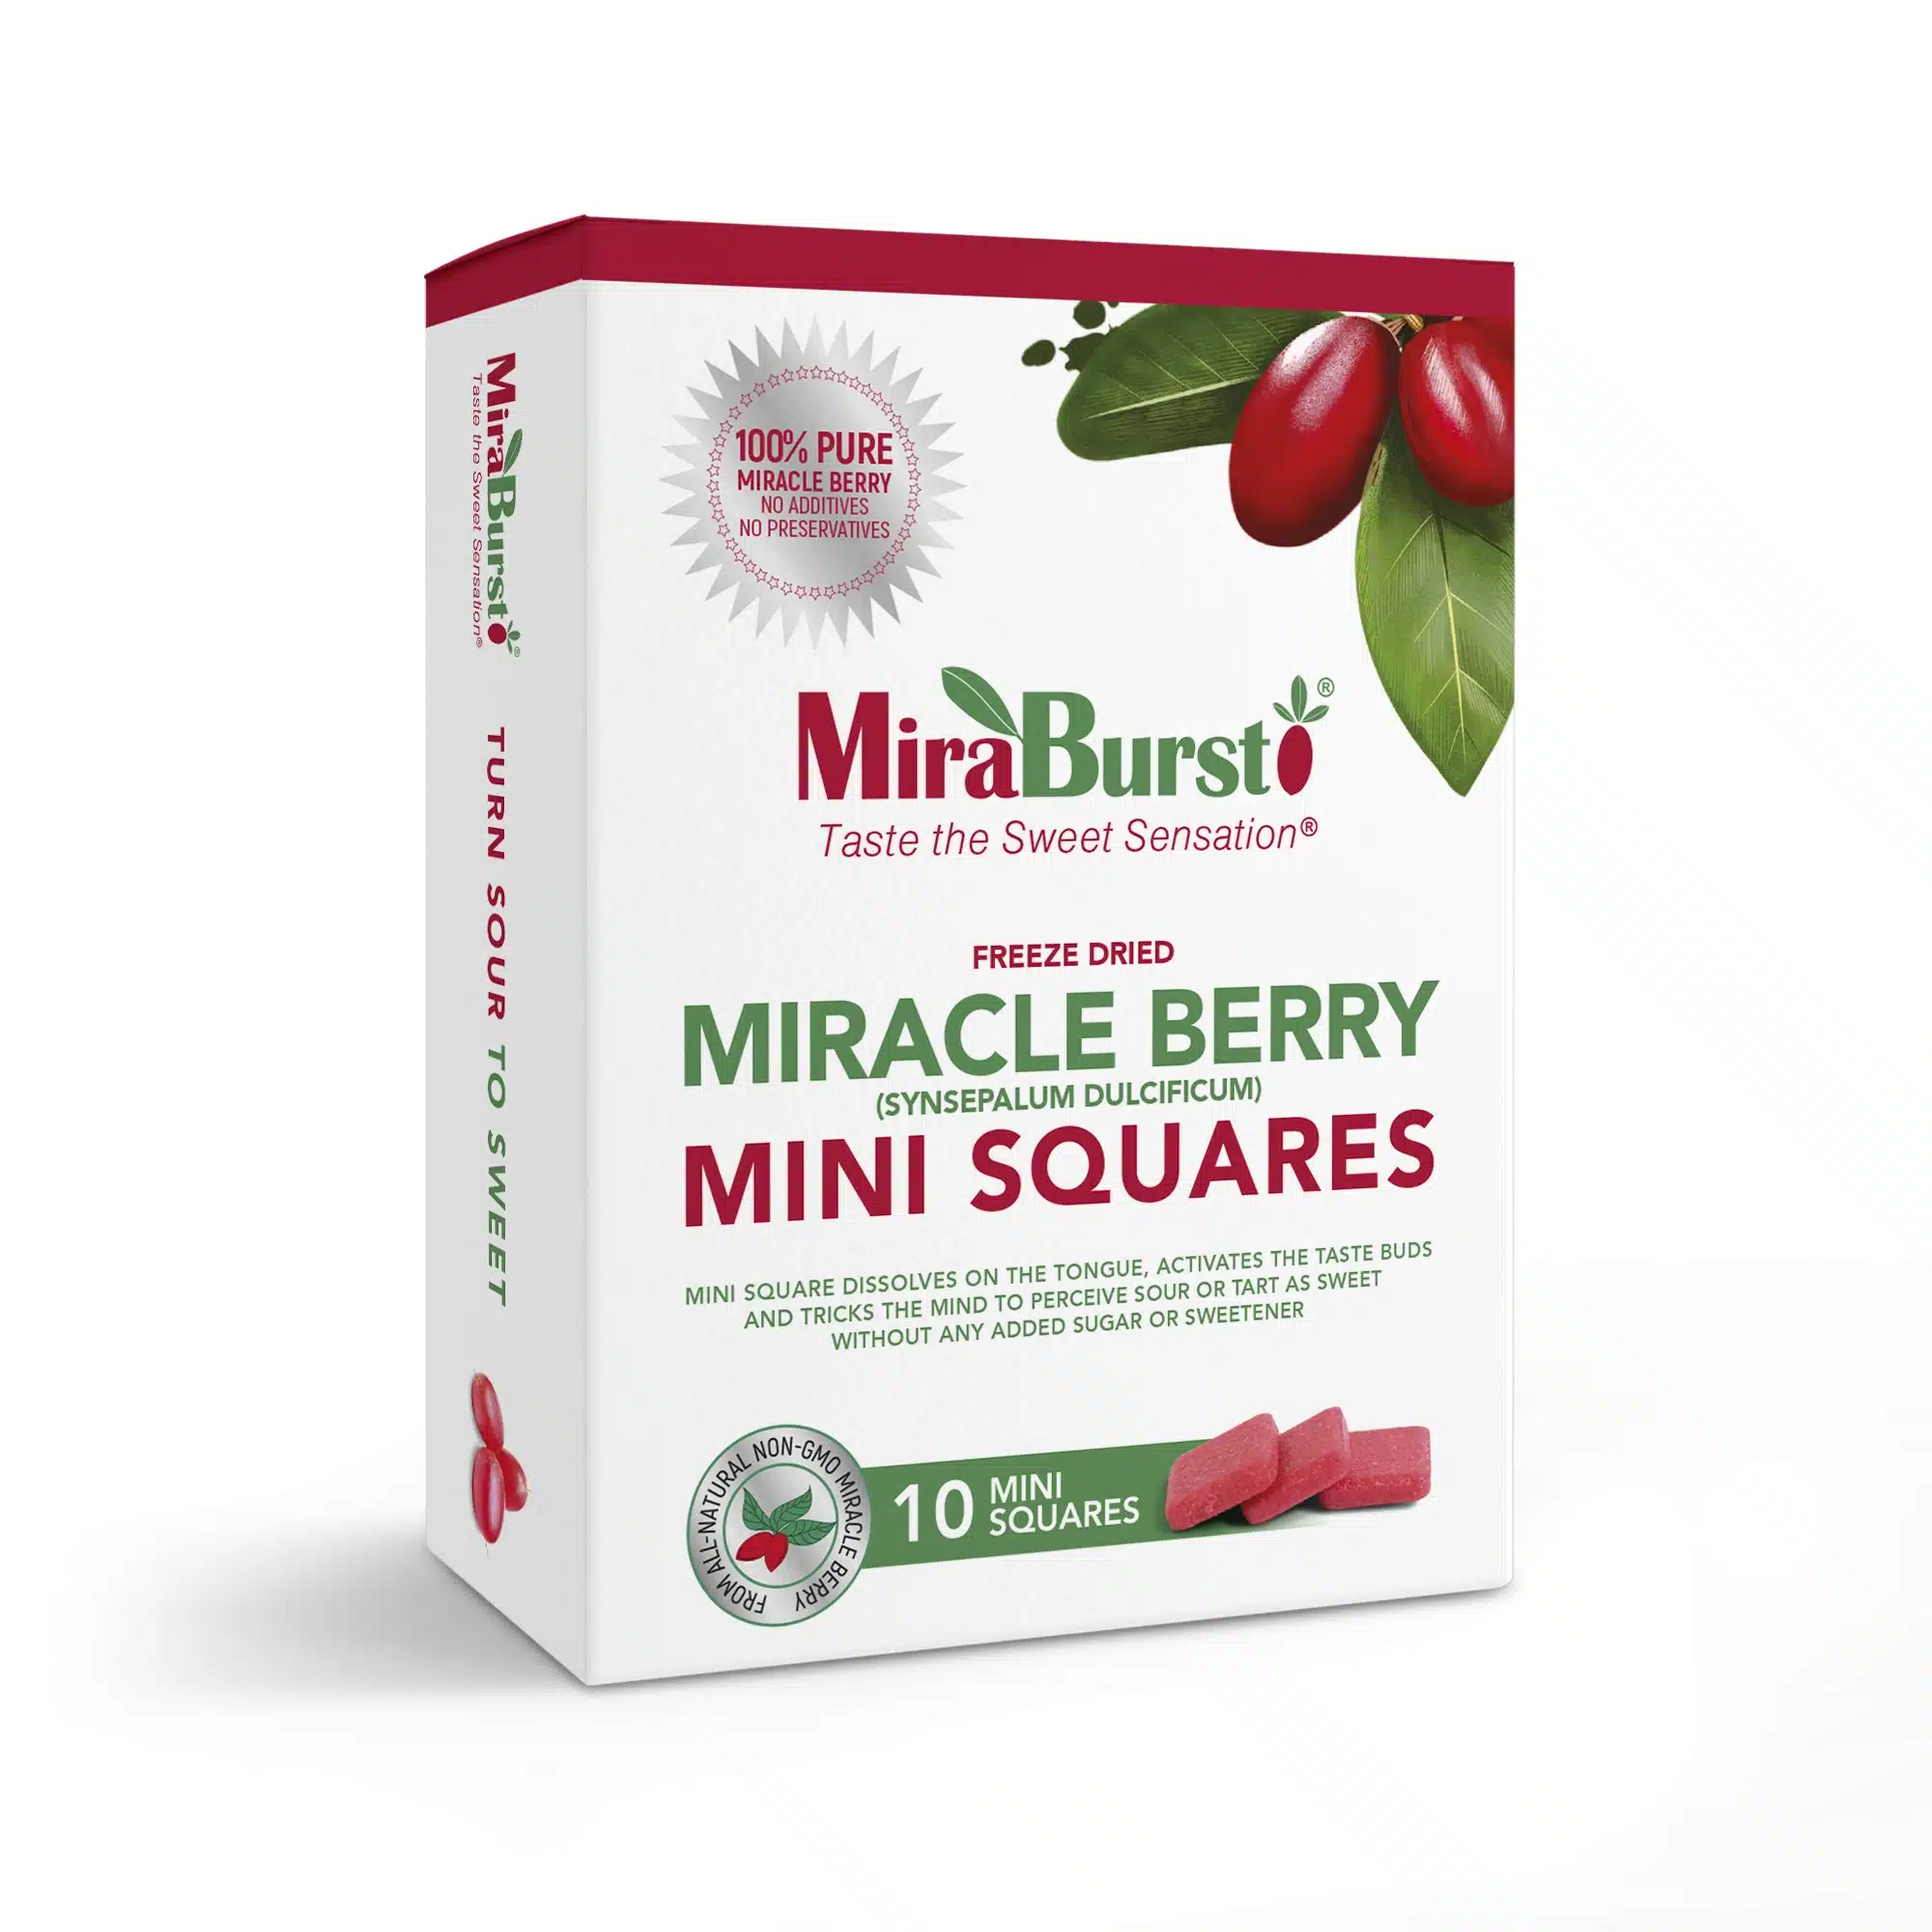 MiraBurst Miracle Berry products in boxes